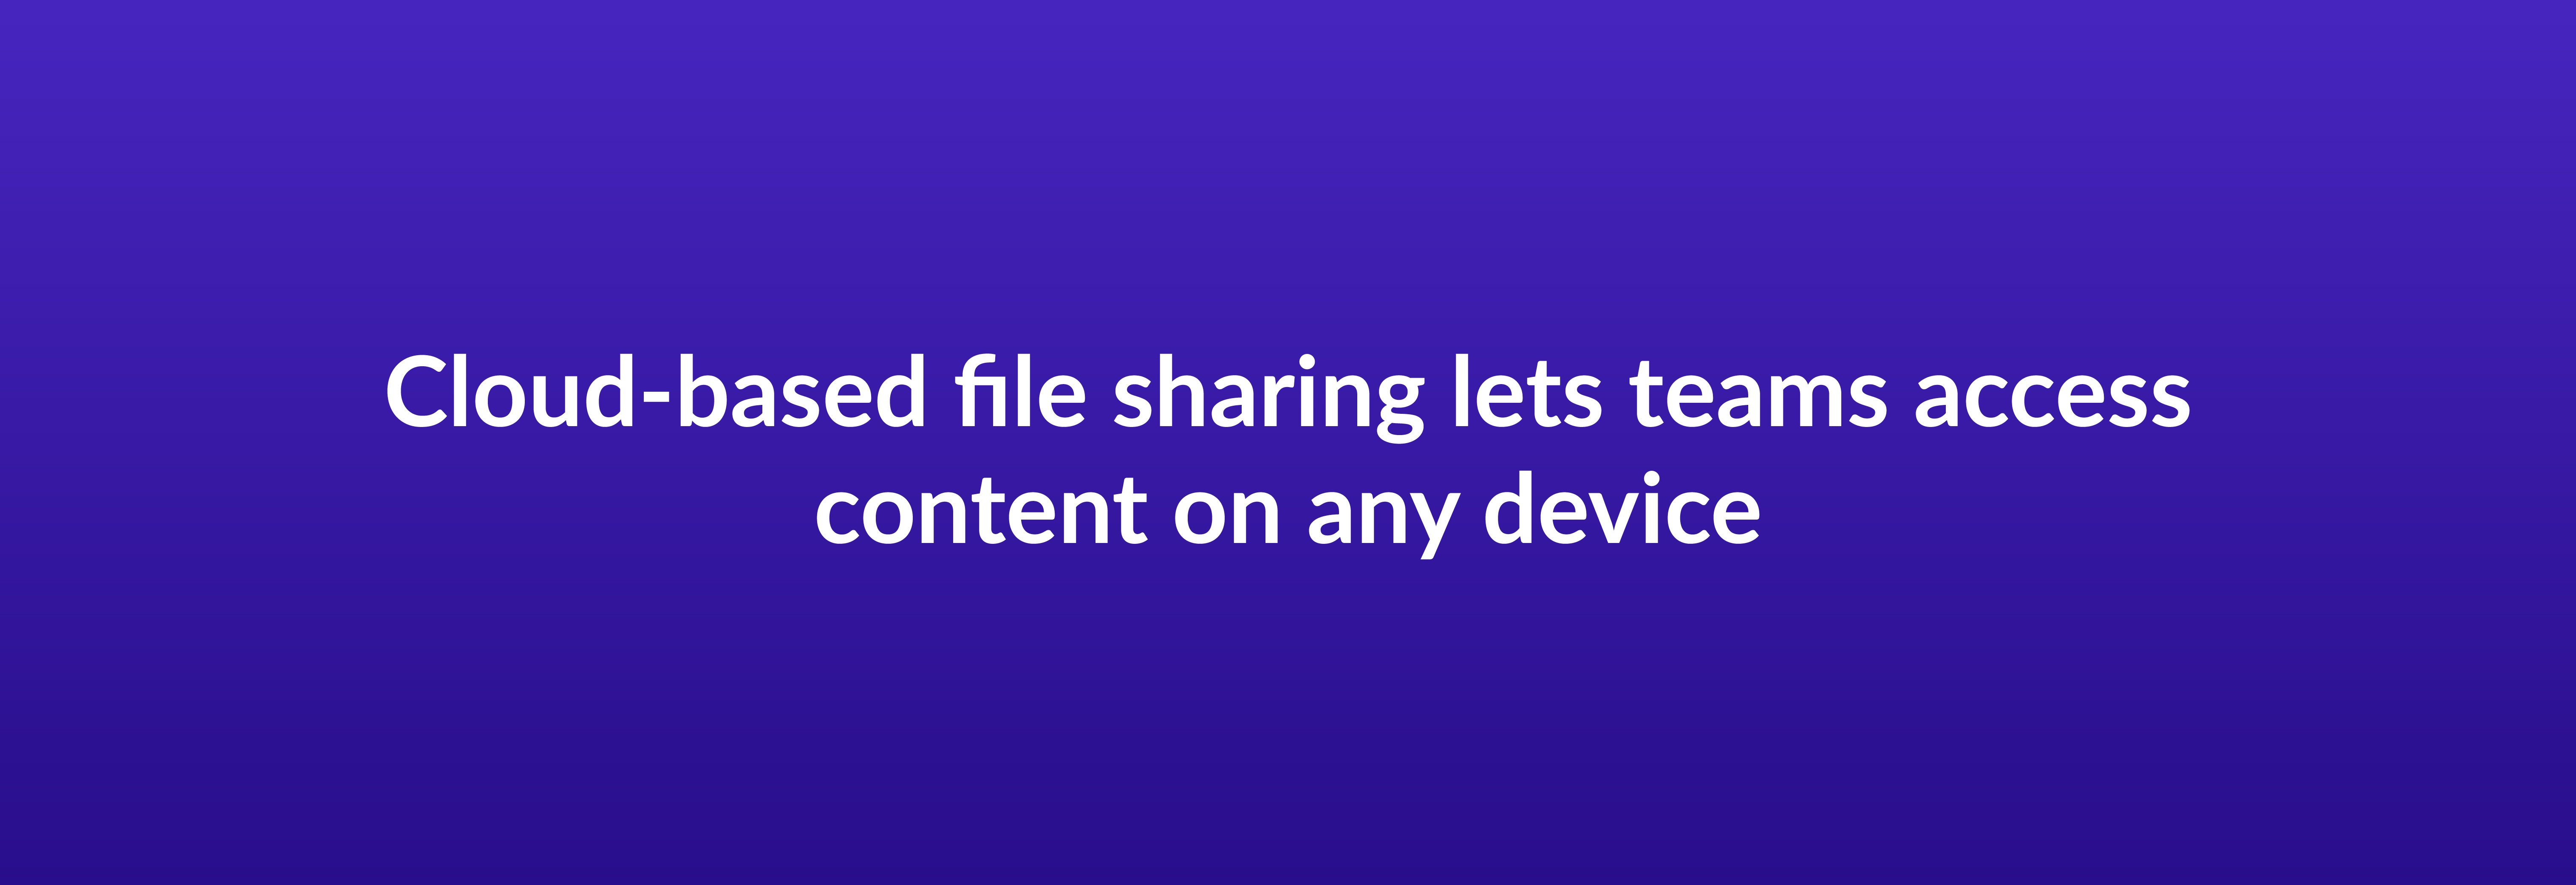 Cloud-based file sharing lets teams access content on any device